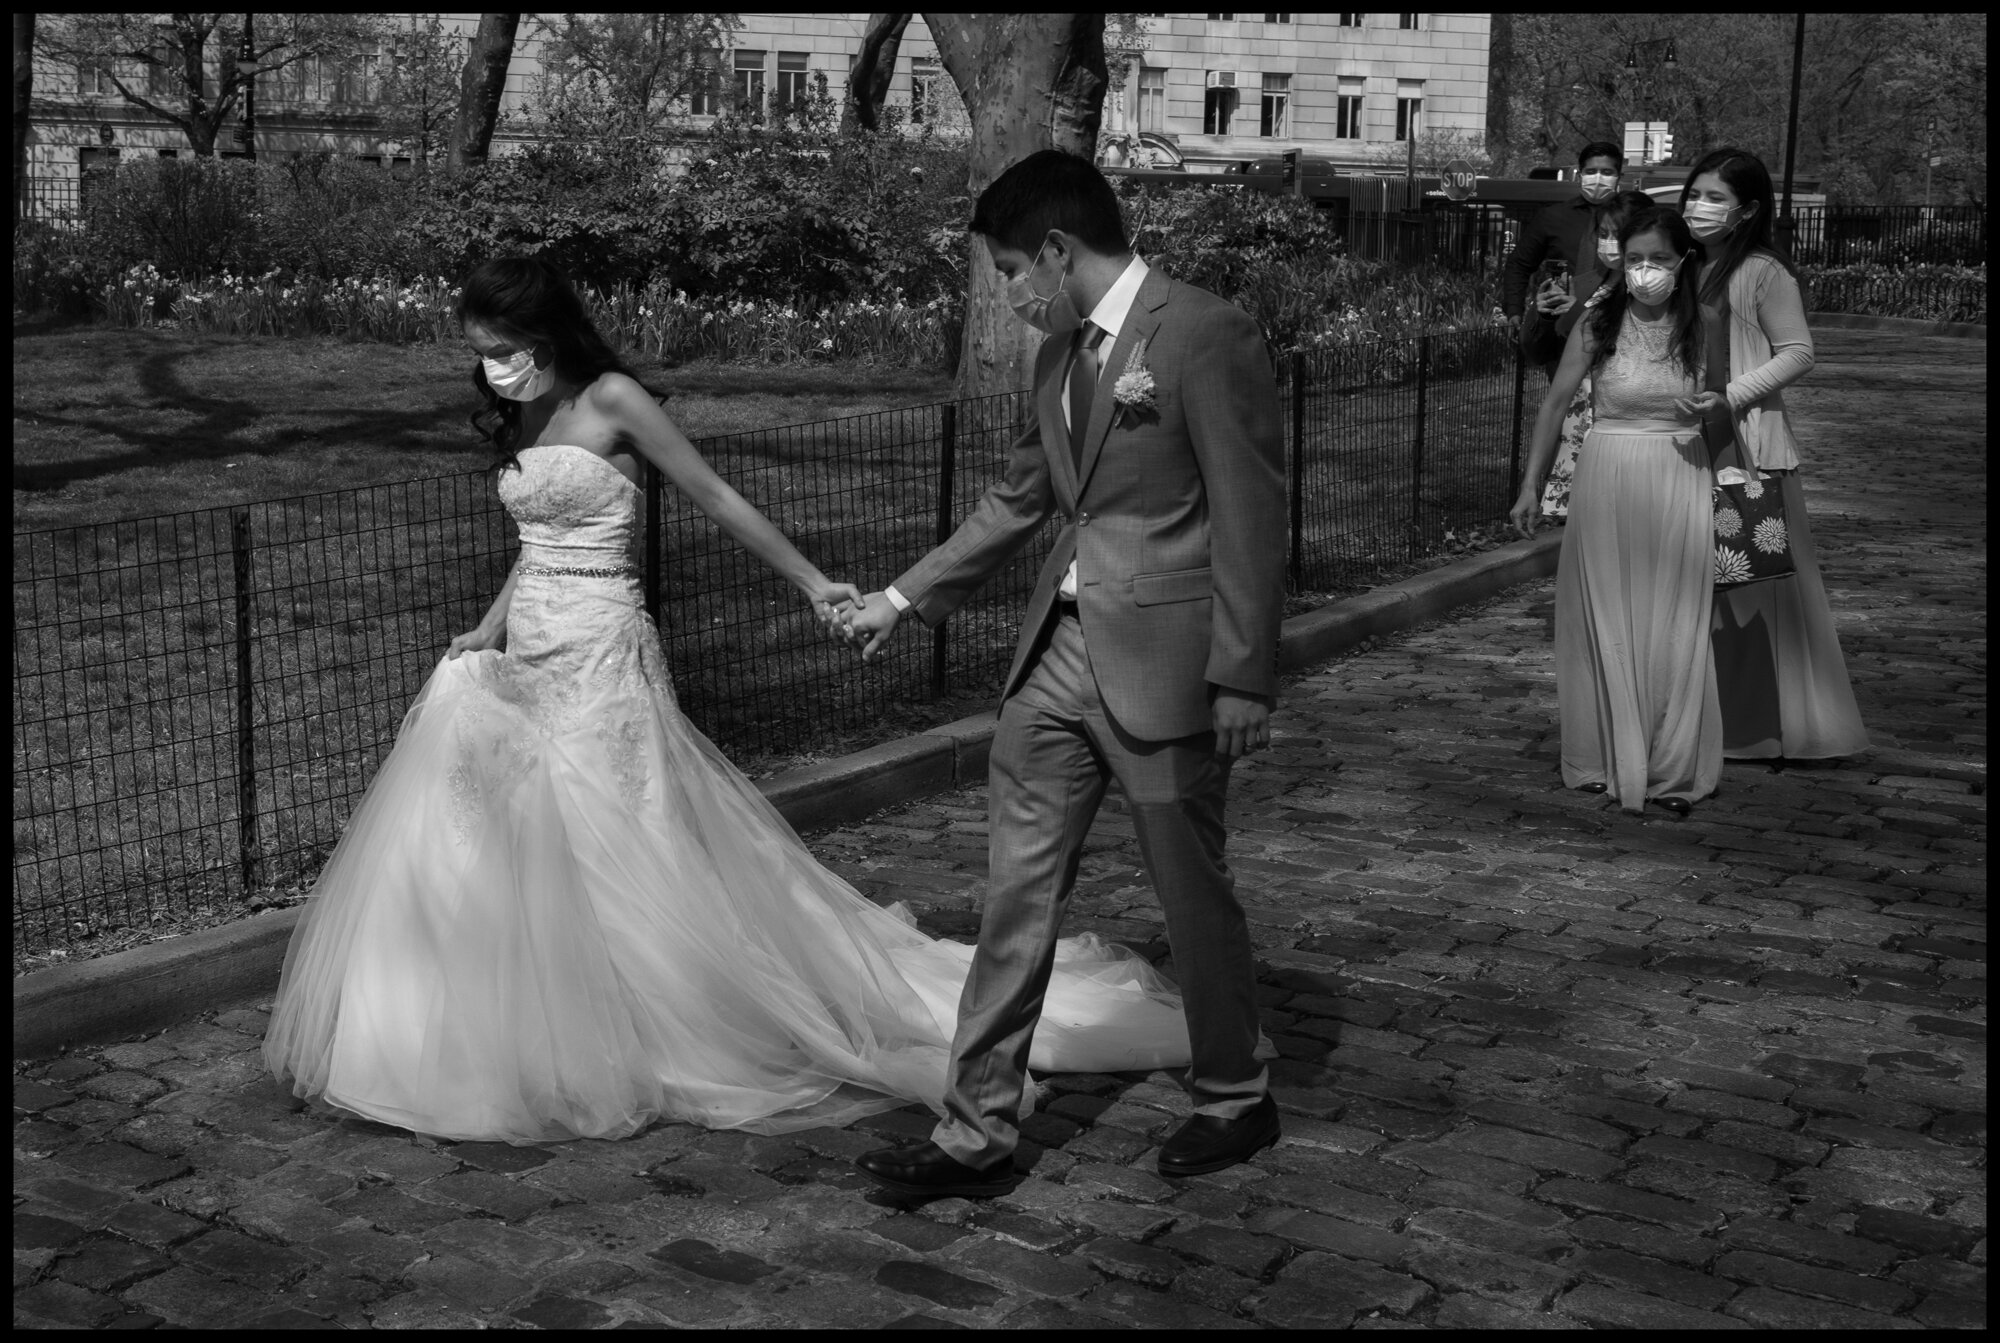  The wedding of Daniel and Emily. Near Central Park, New York  April 25, 2020. © Peter Turnley  ID# 30-001 